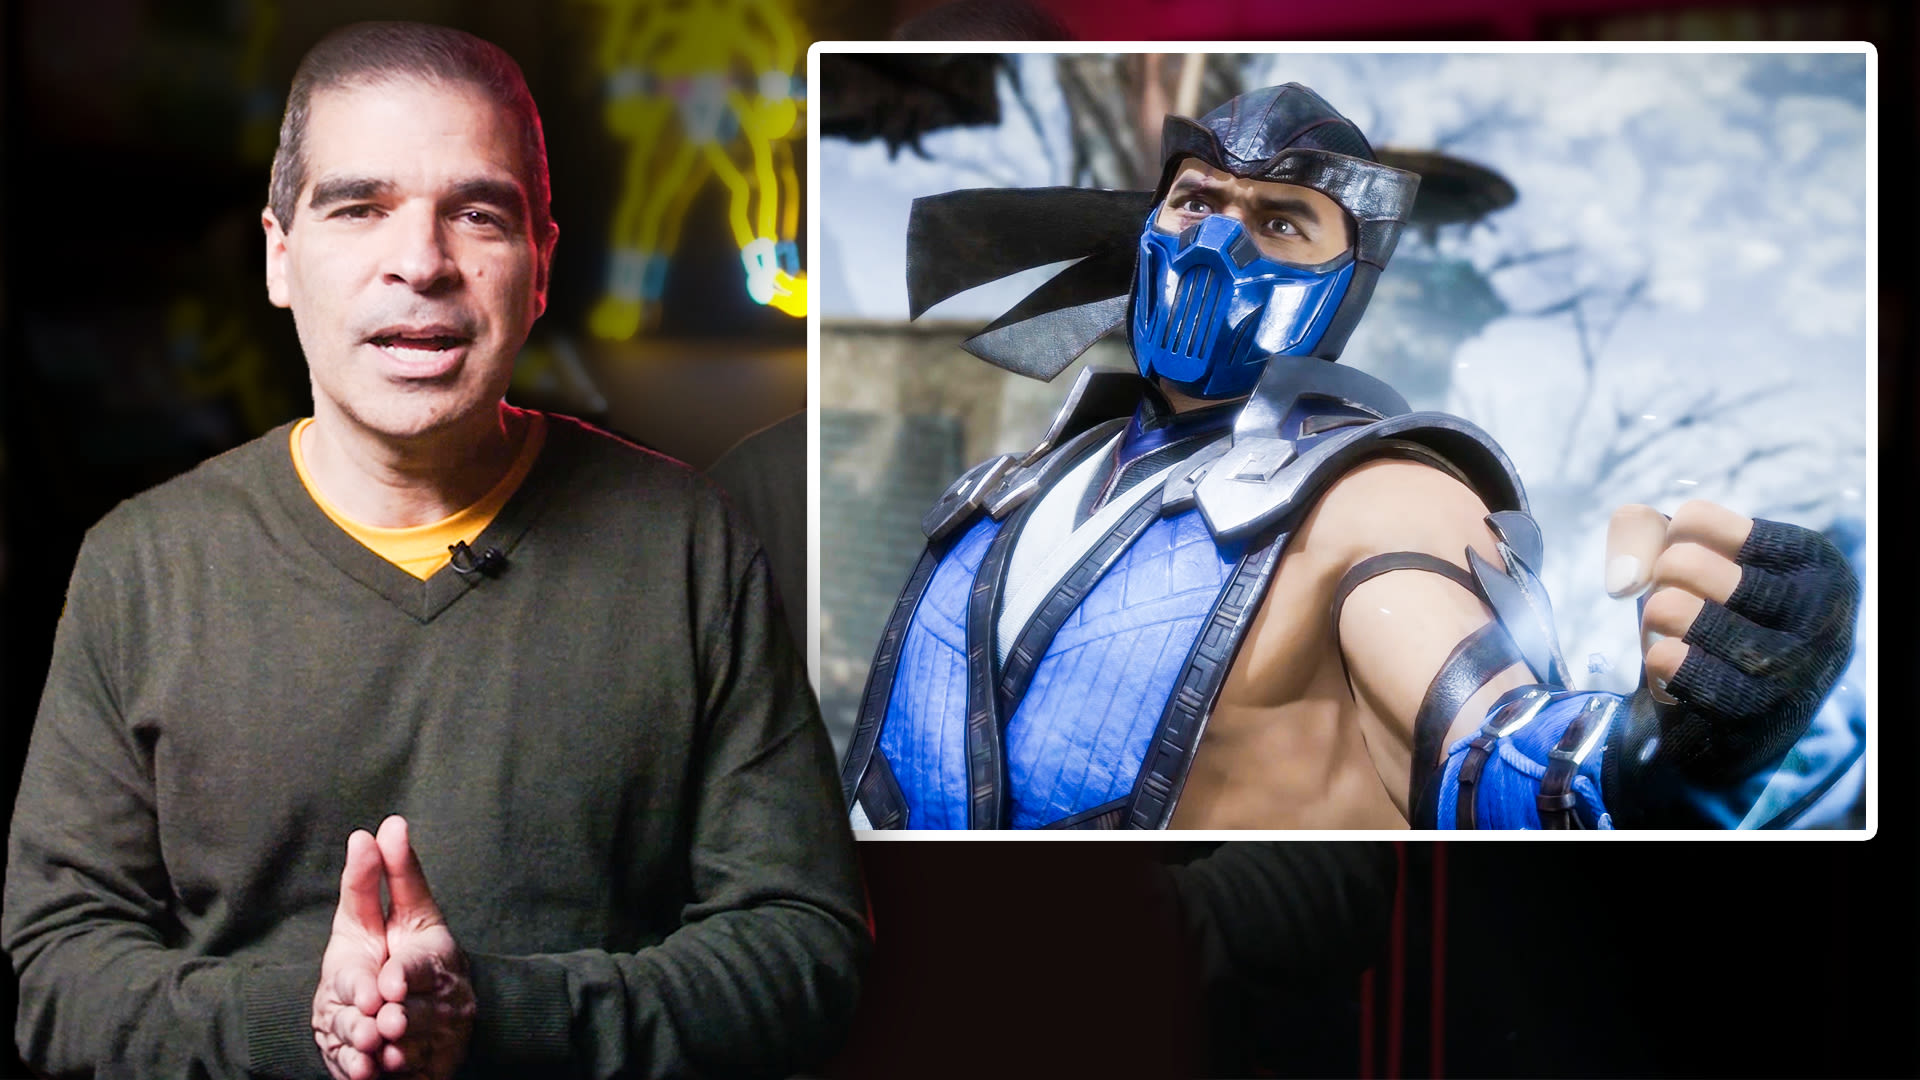 Watch Every Mortal Kombat Fatality In A 20-Minute Video - Game Informer